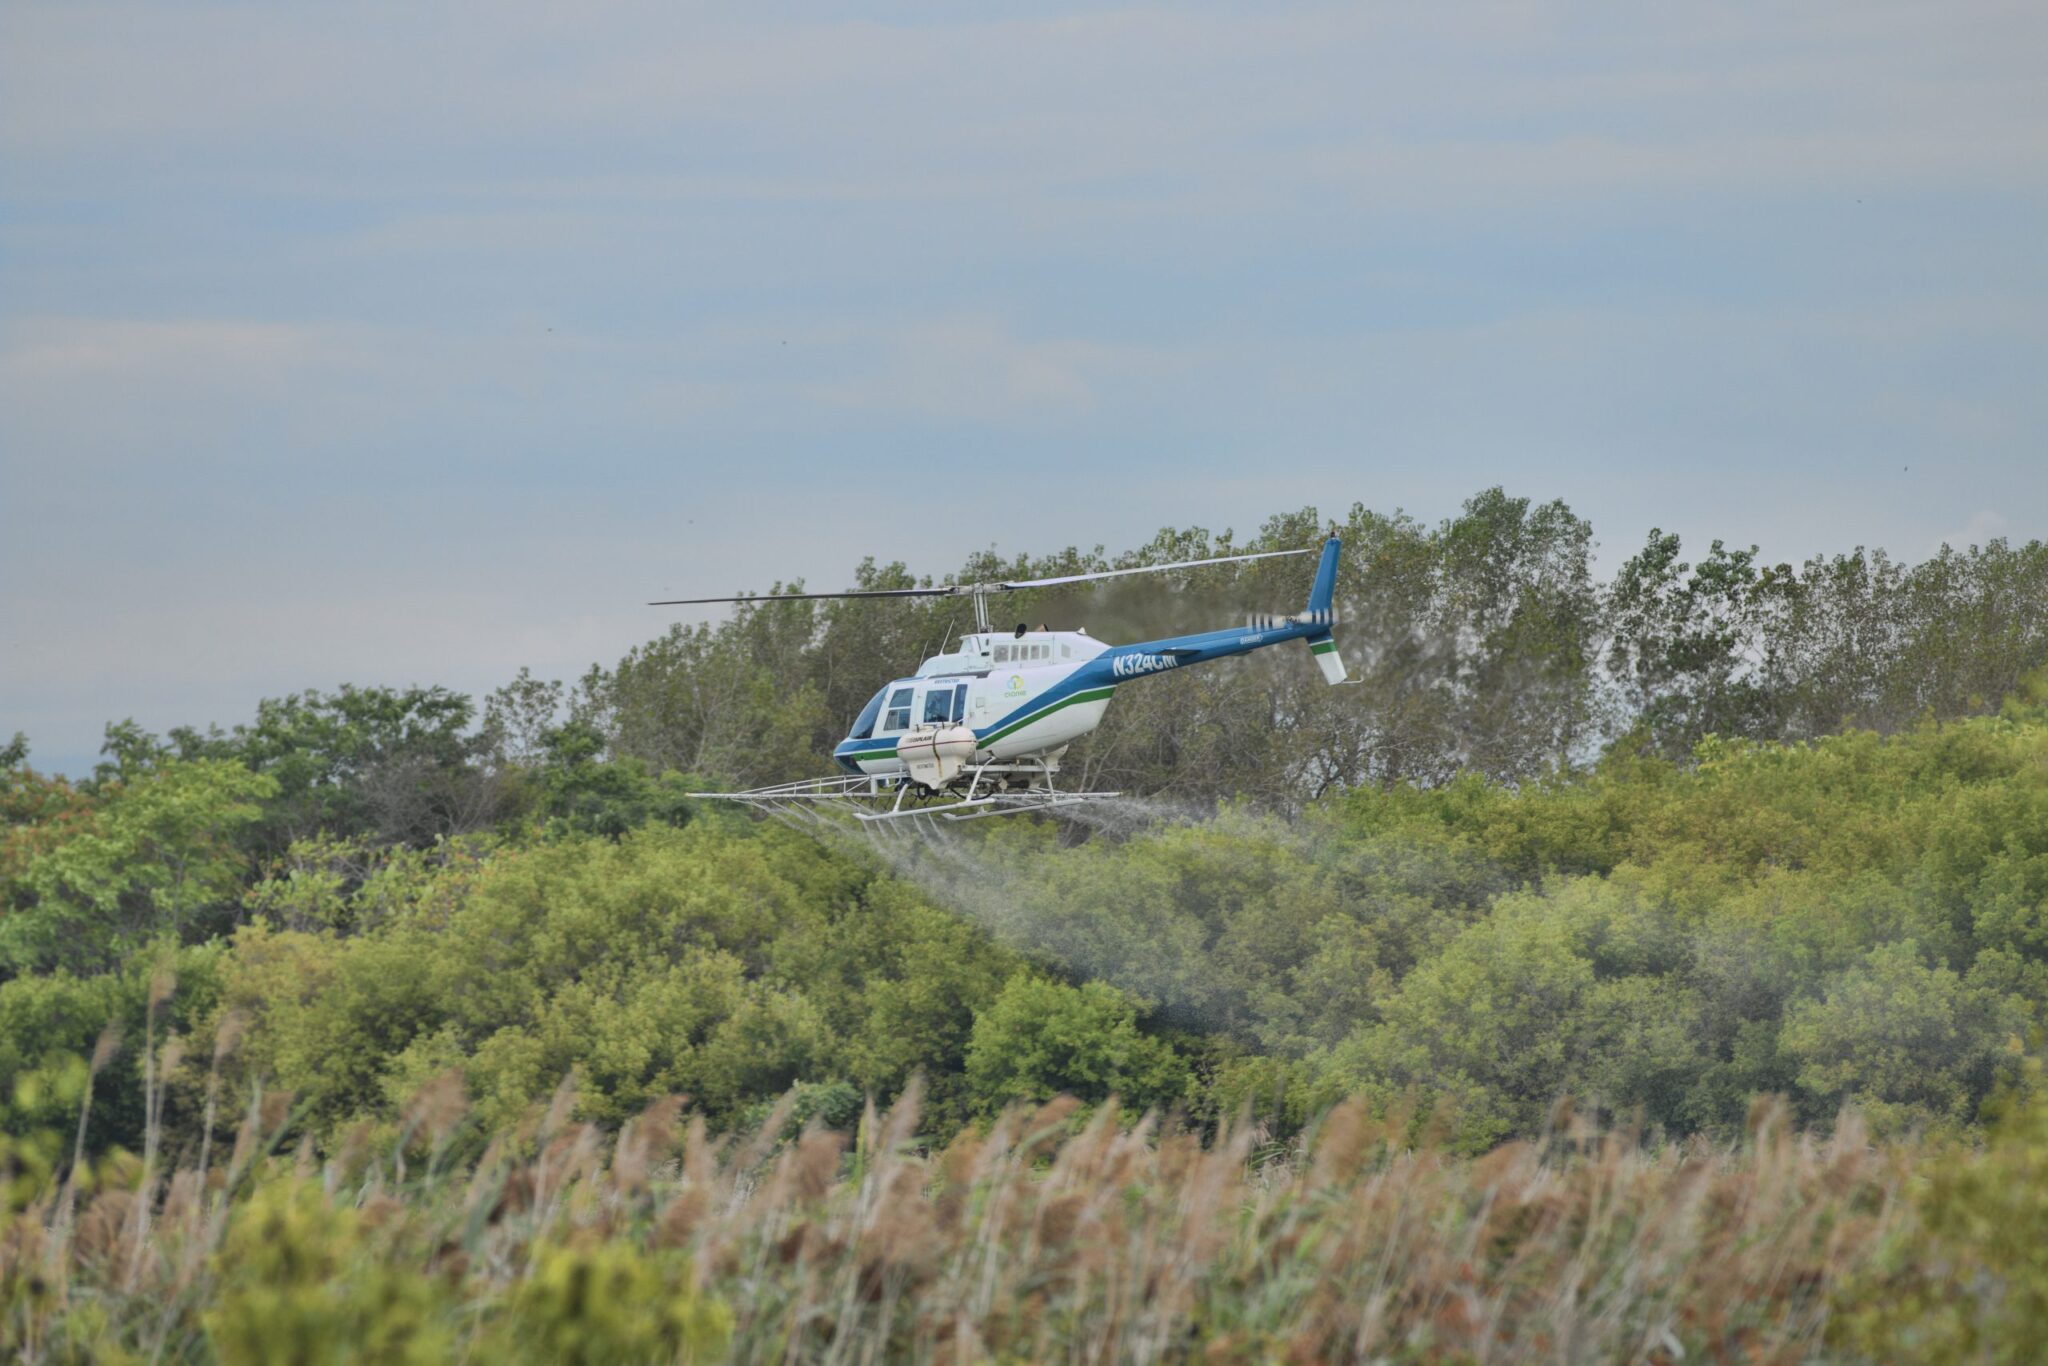 Clarkes helicopter applying herbicide to phragmites in an aerial application.